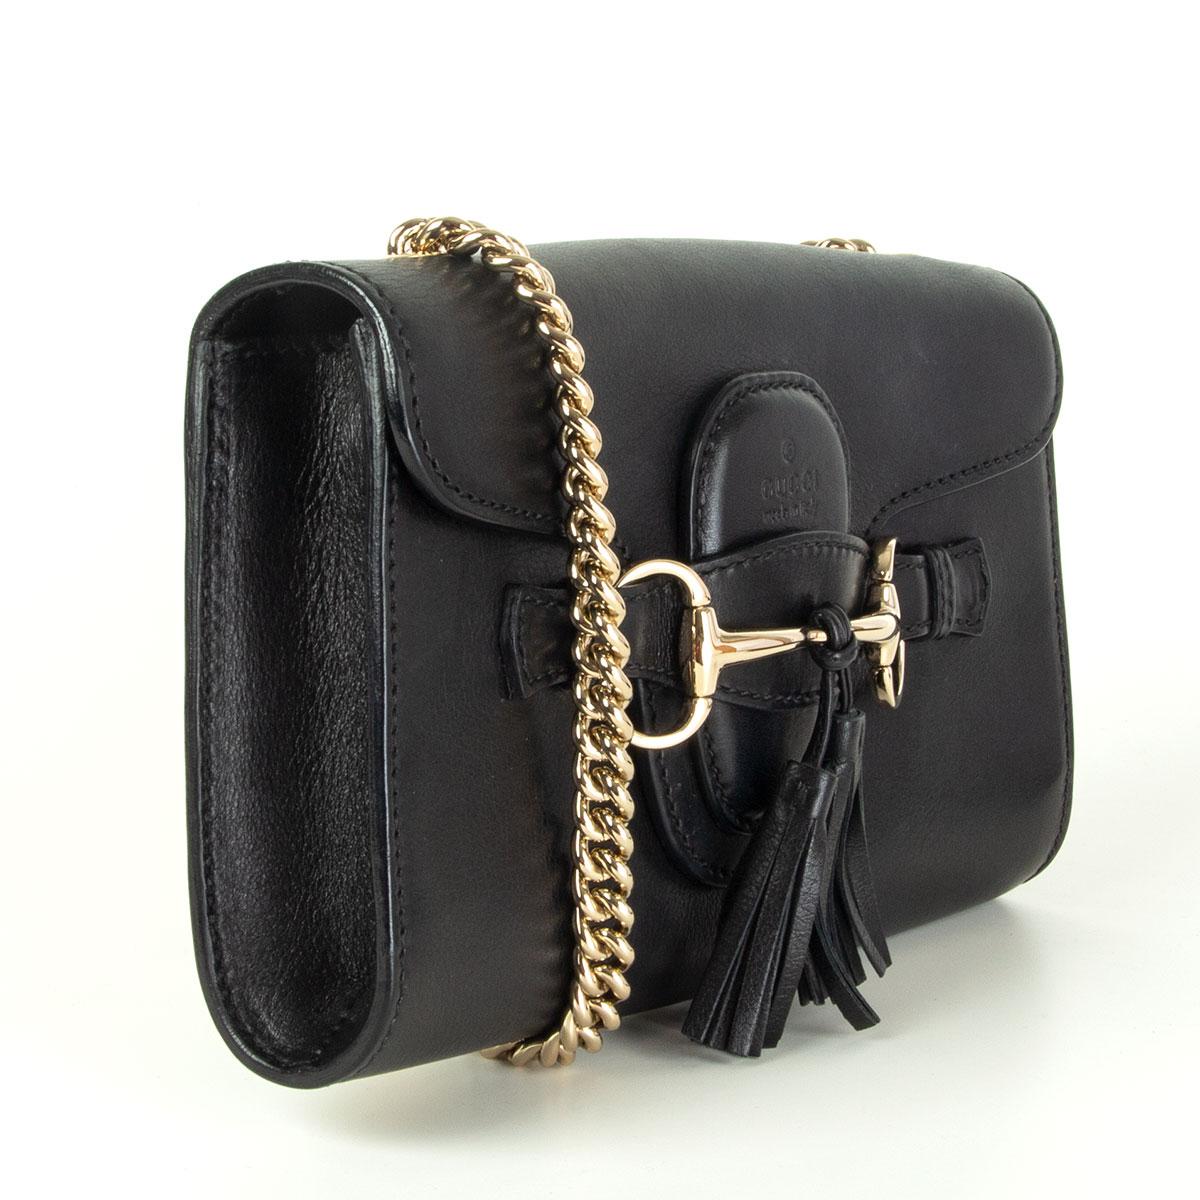 Gucci Emily shoulder bag in black calfskin with tassel and horsebit buckle detail in light gold-tone. Lined in black leather with one open pocket against the back. Has been worn and is in excellent condition. Comes with dust bag. 

Height 15cm